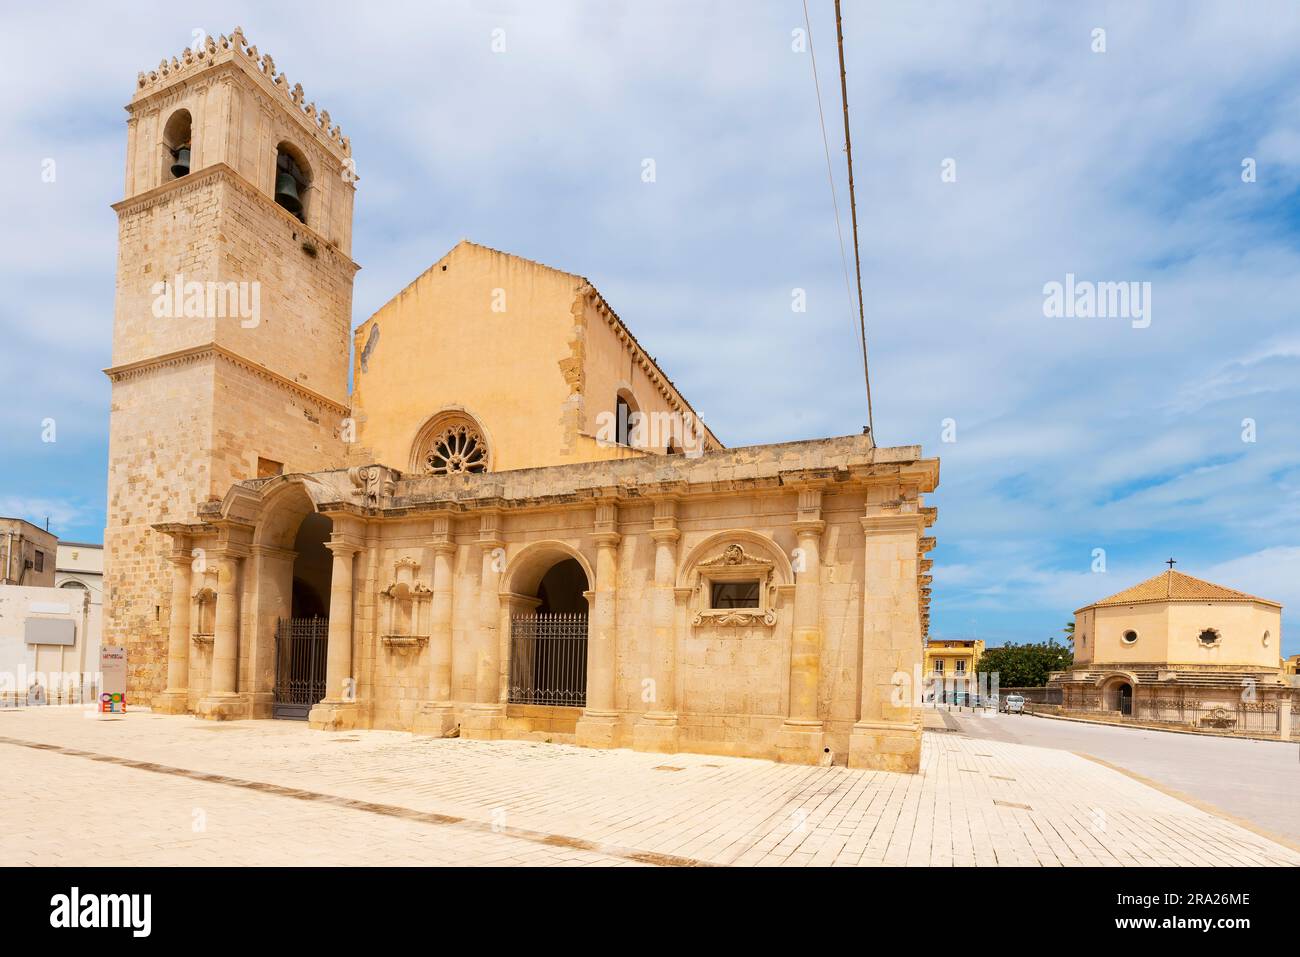 Sanctuary of Santa Lucia al Sepolcro. Sicily, Italy. The church was built around 1100 by the Normans and of the Norman layout with a basilica plan, cl Stock Photo